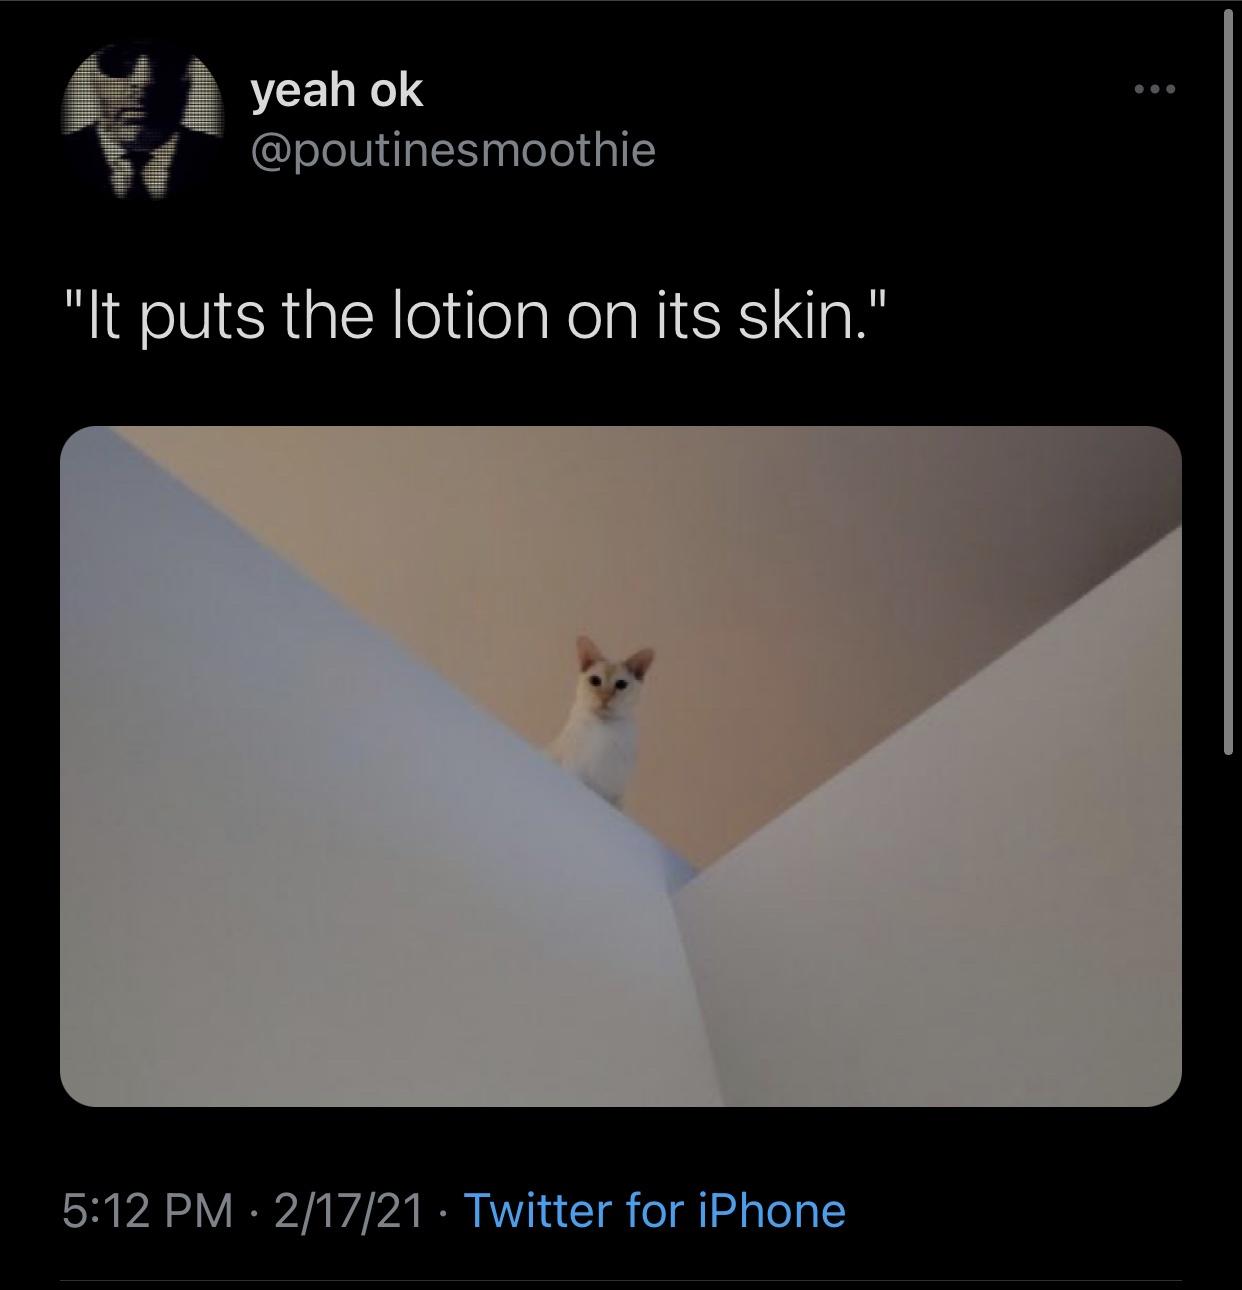 angle - yeah ok. "It puts the lotion on its skin." 21721 Twitter for iPhone